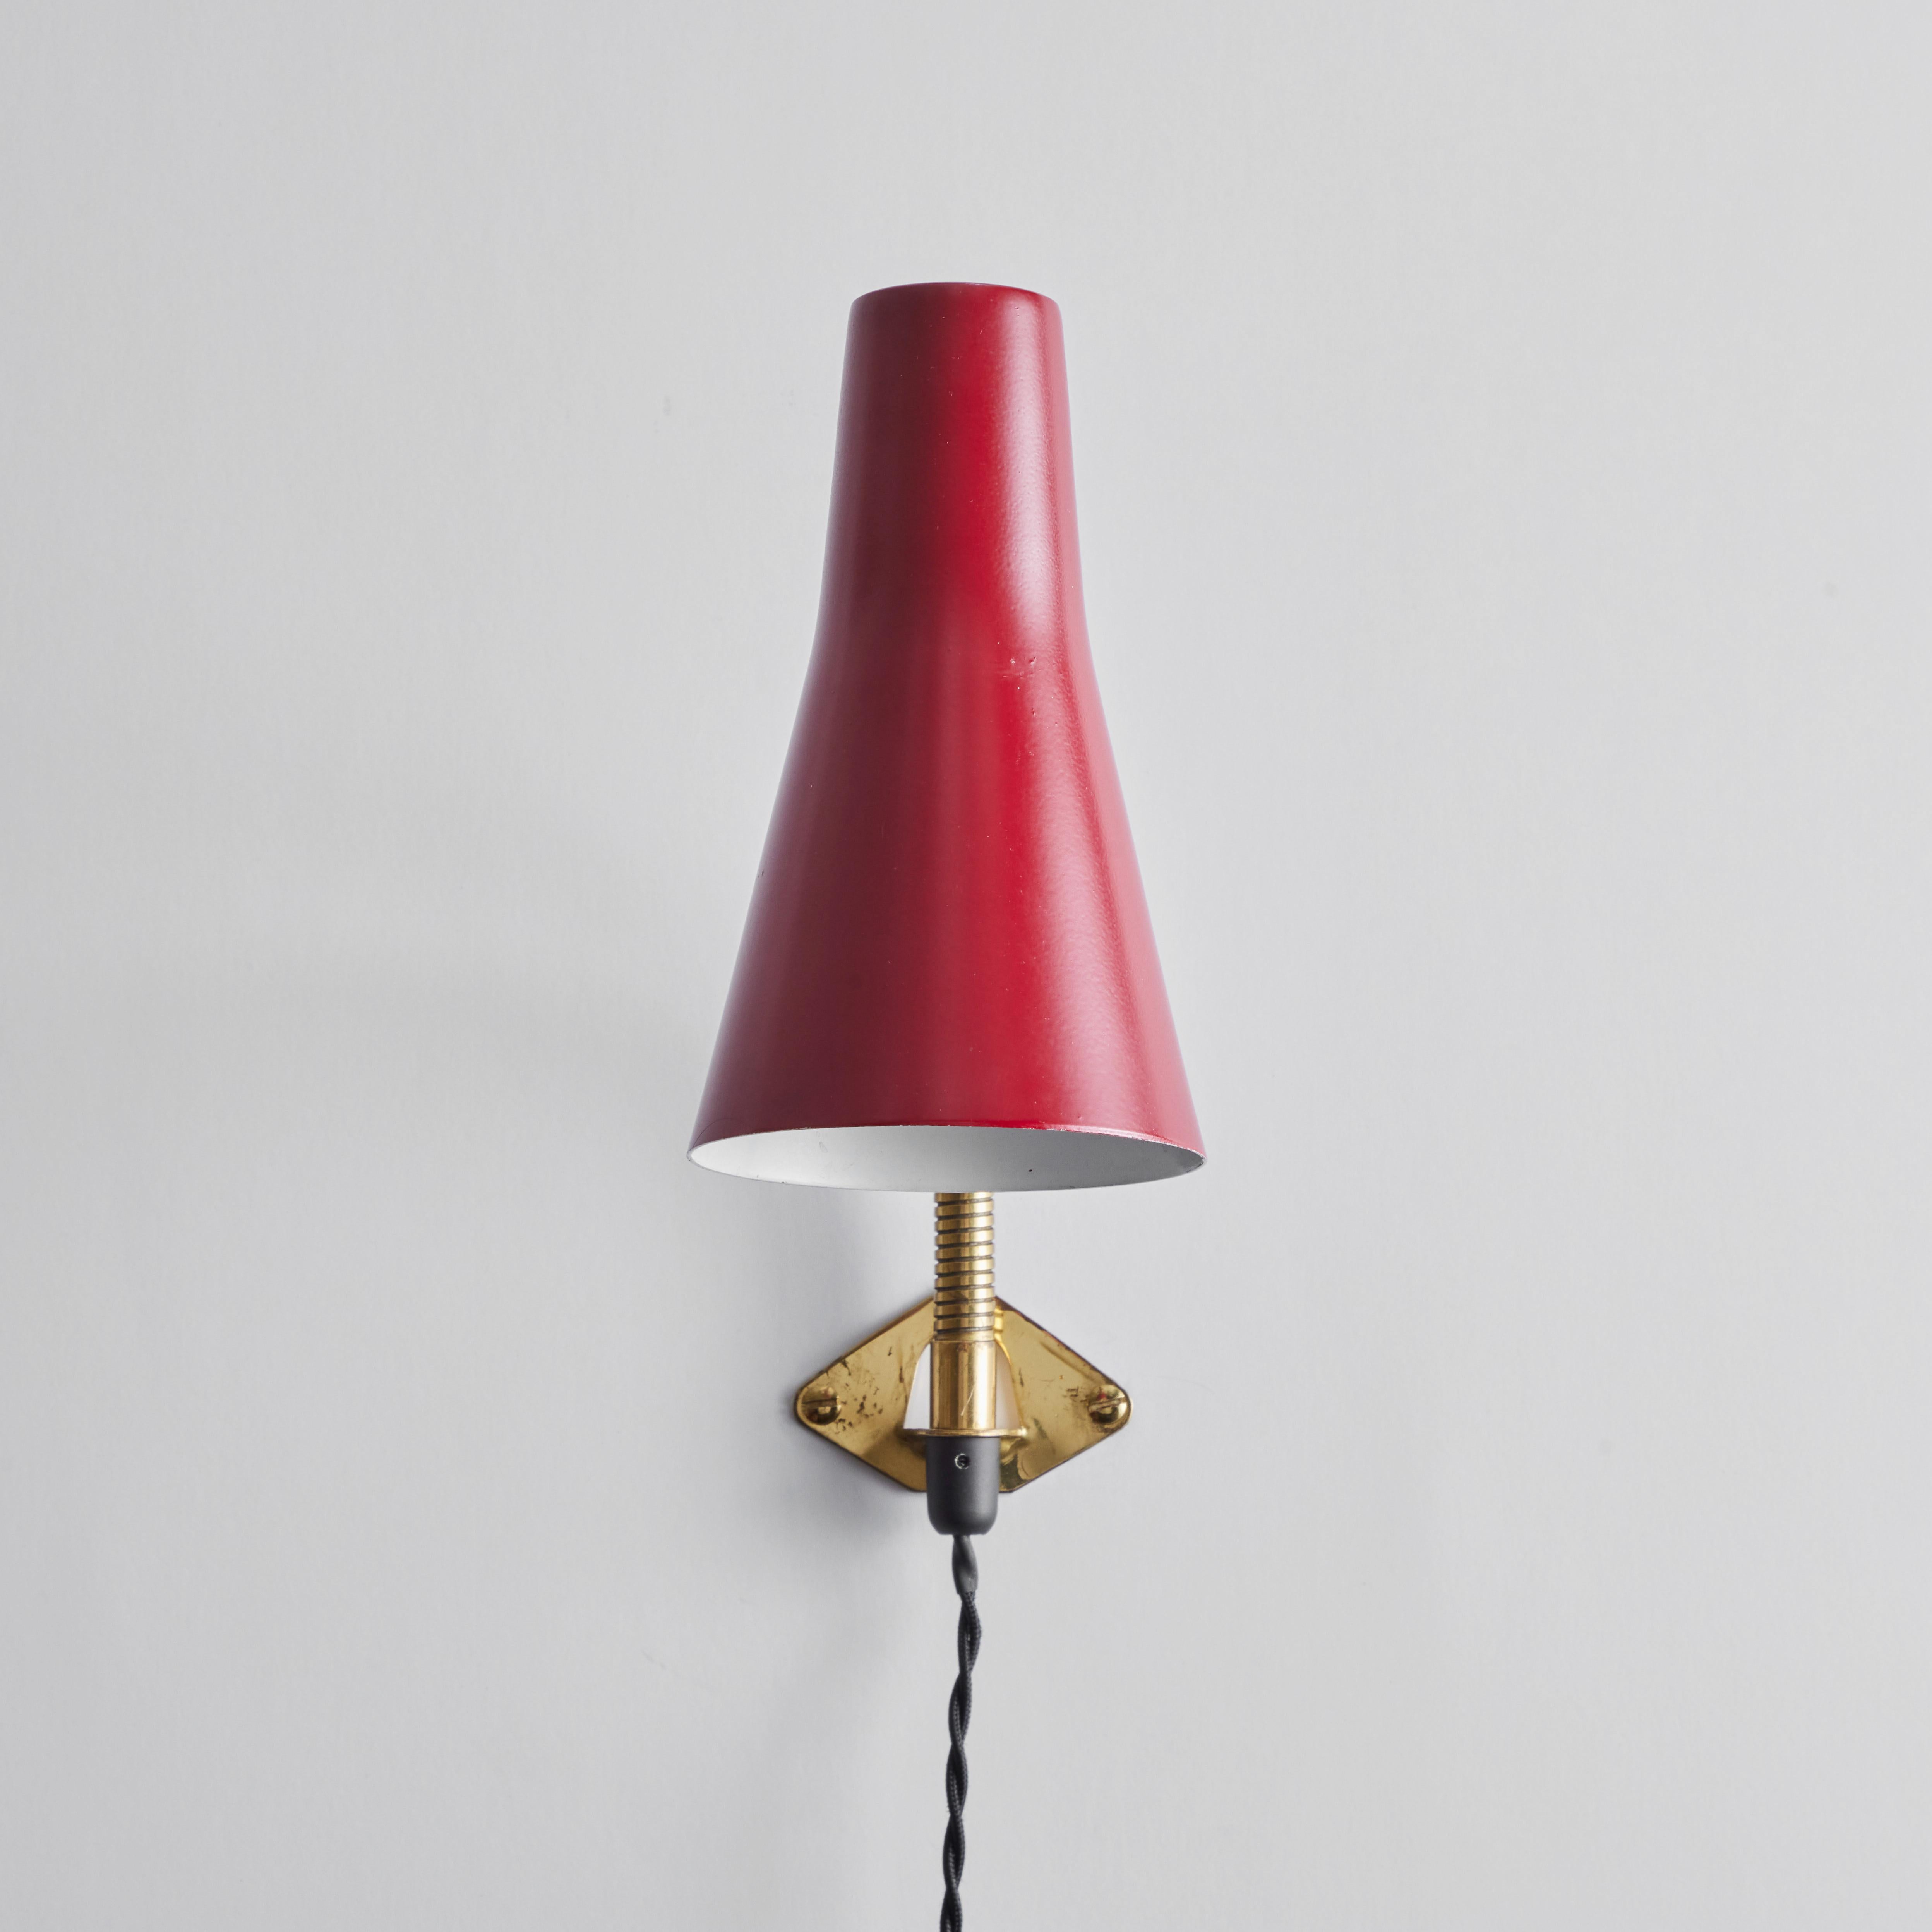 Pair of 1950s Lisa Johansson Pape Red Adjustable wall lights for Stockmann Orno. A versatile pair of adjustable wall lights, the brass gooseneck arm with shade can be raised and lowered as well as rotated right and left. The articulating arm can be